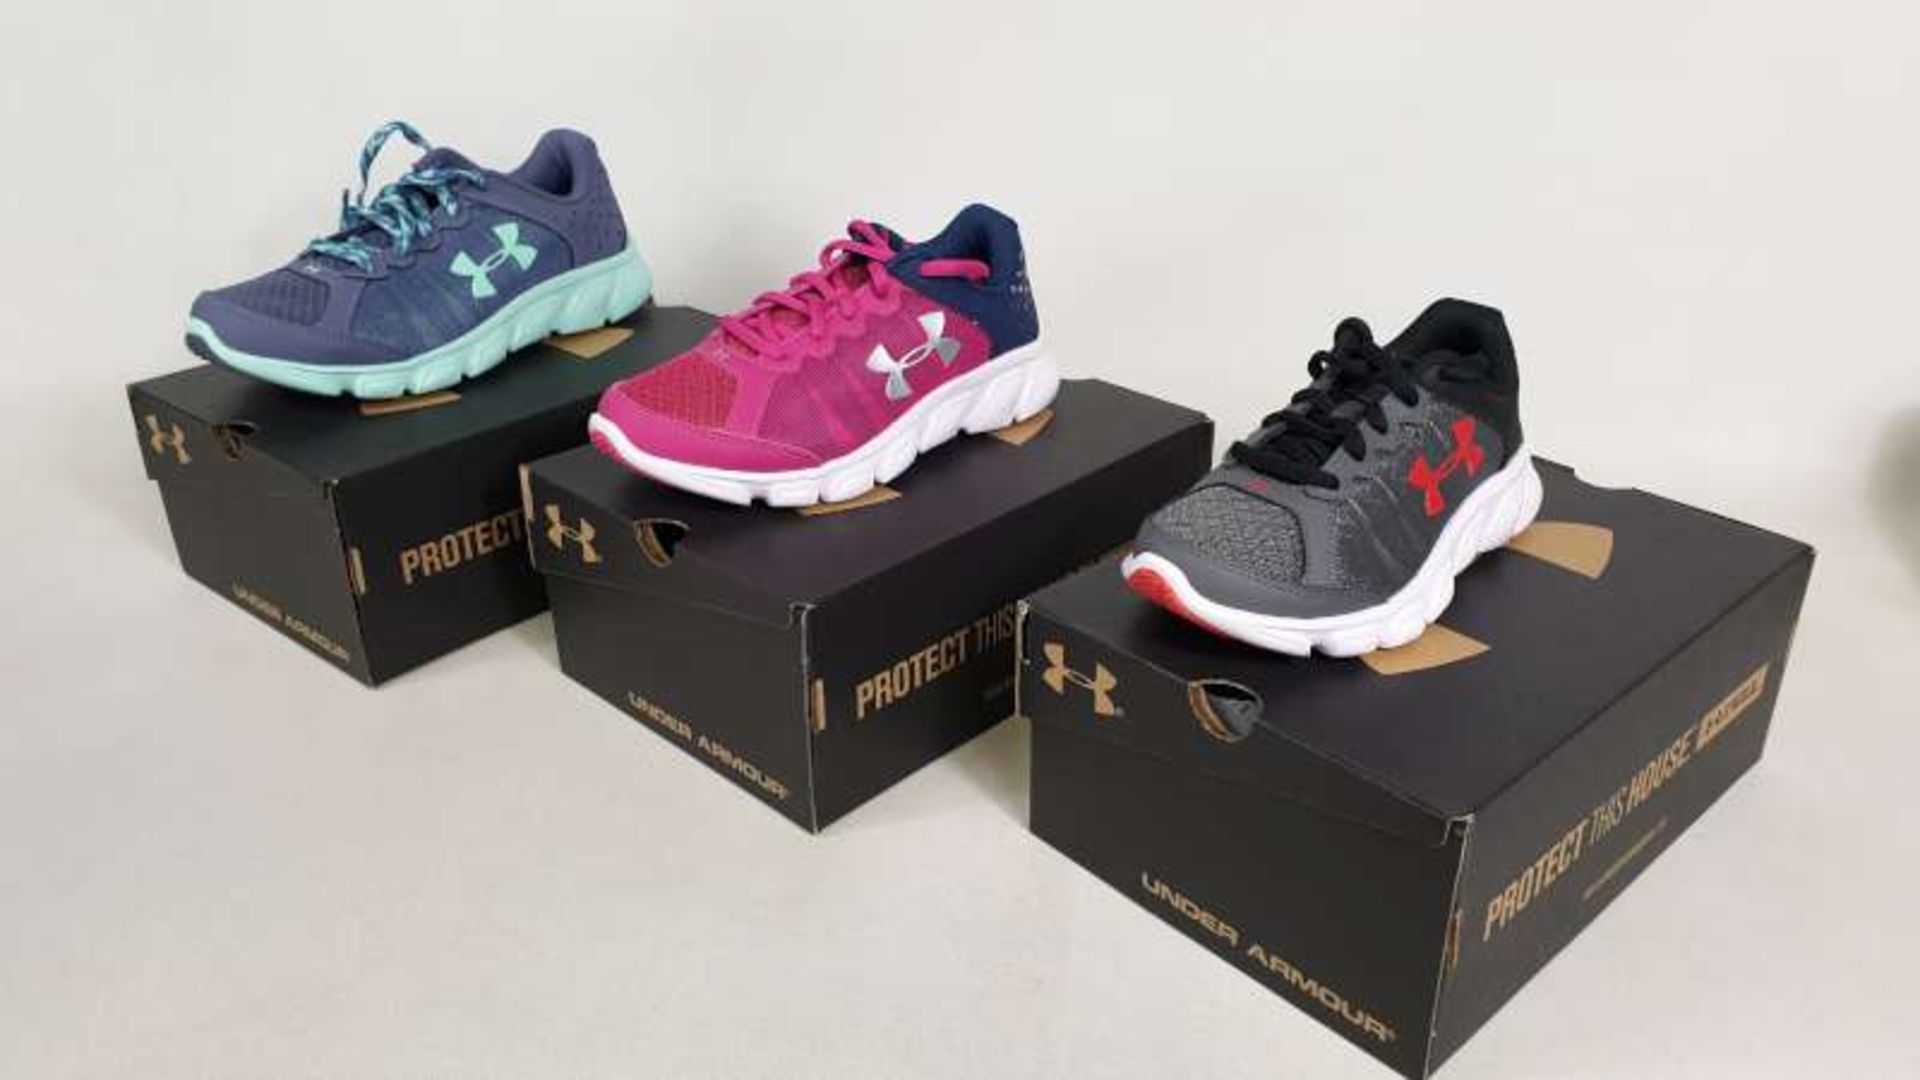 10 X BRAND NEW BOXED UNDER ARMOUR CHILDRENS TRAINERS IN VARIOUS STYLES AND SIZES